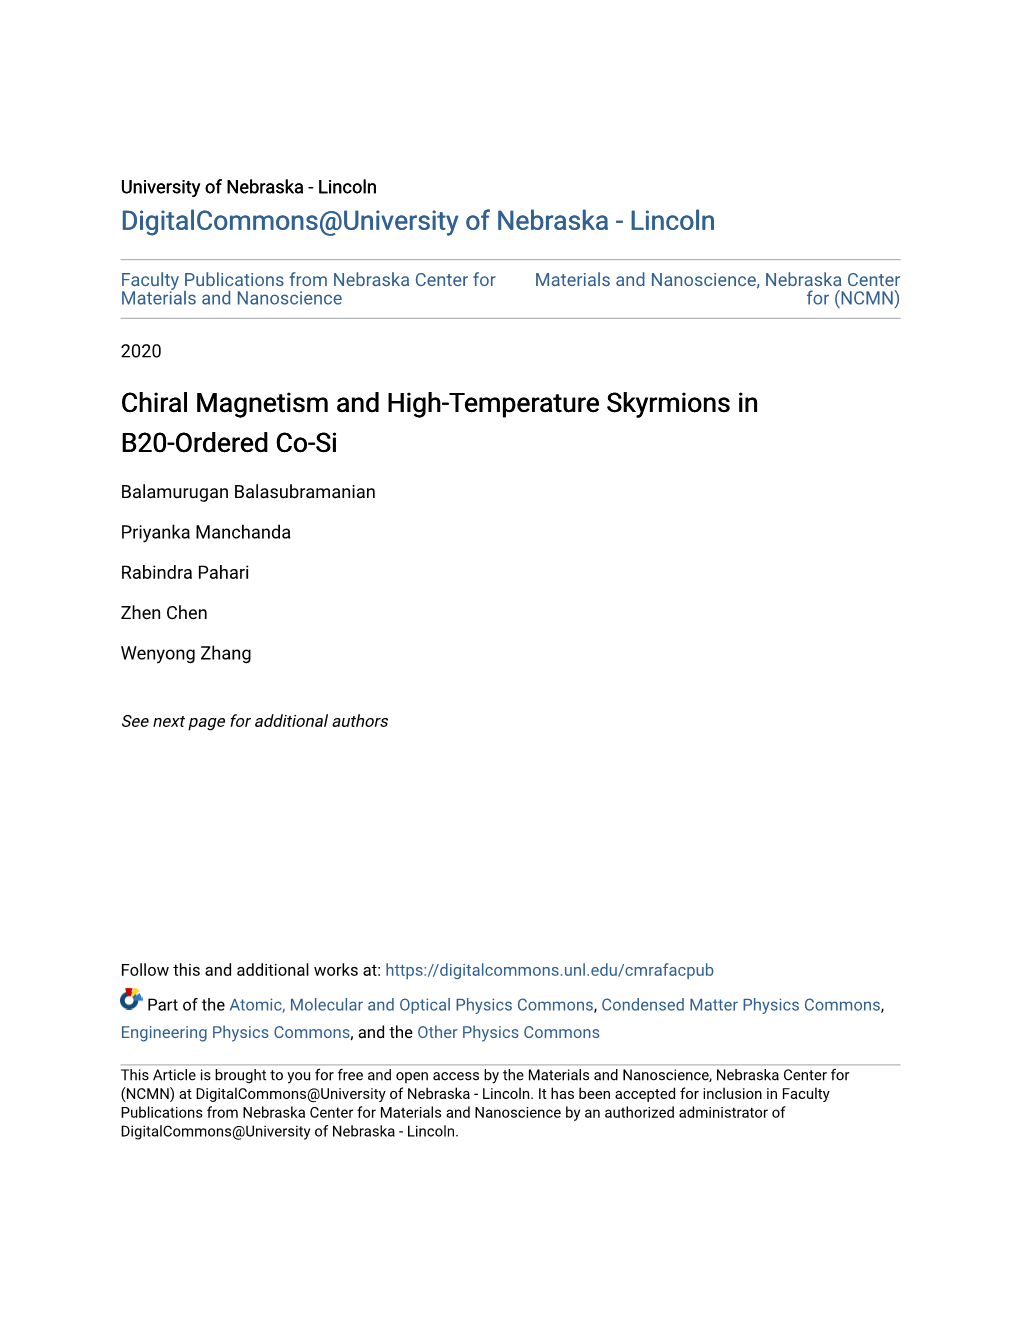 Chiral Magnetism and High-Temperature Skyrmions in B20-Ordered Co-Si